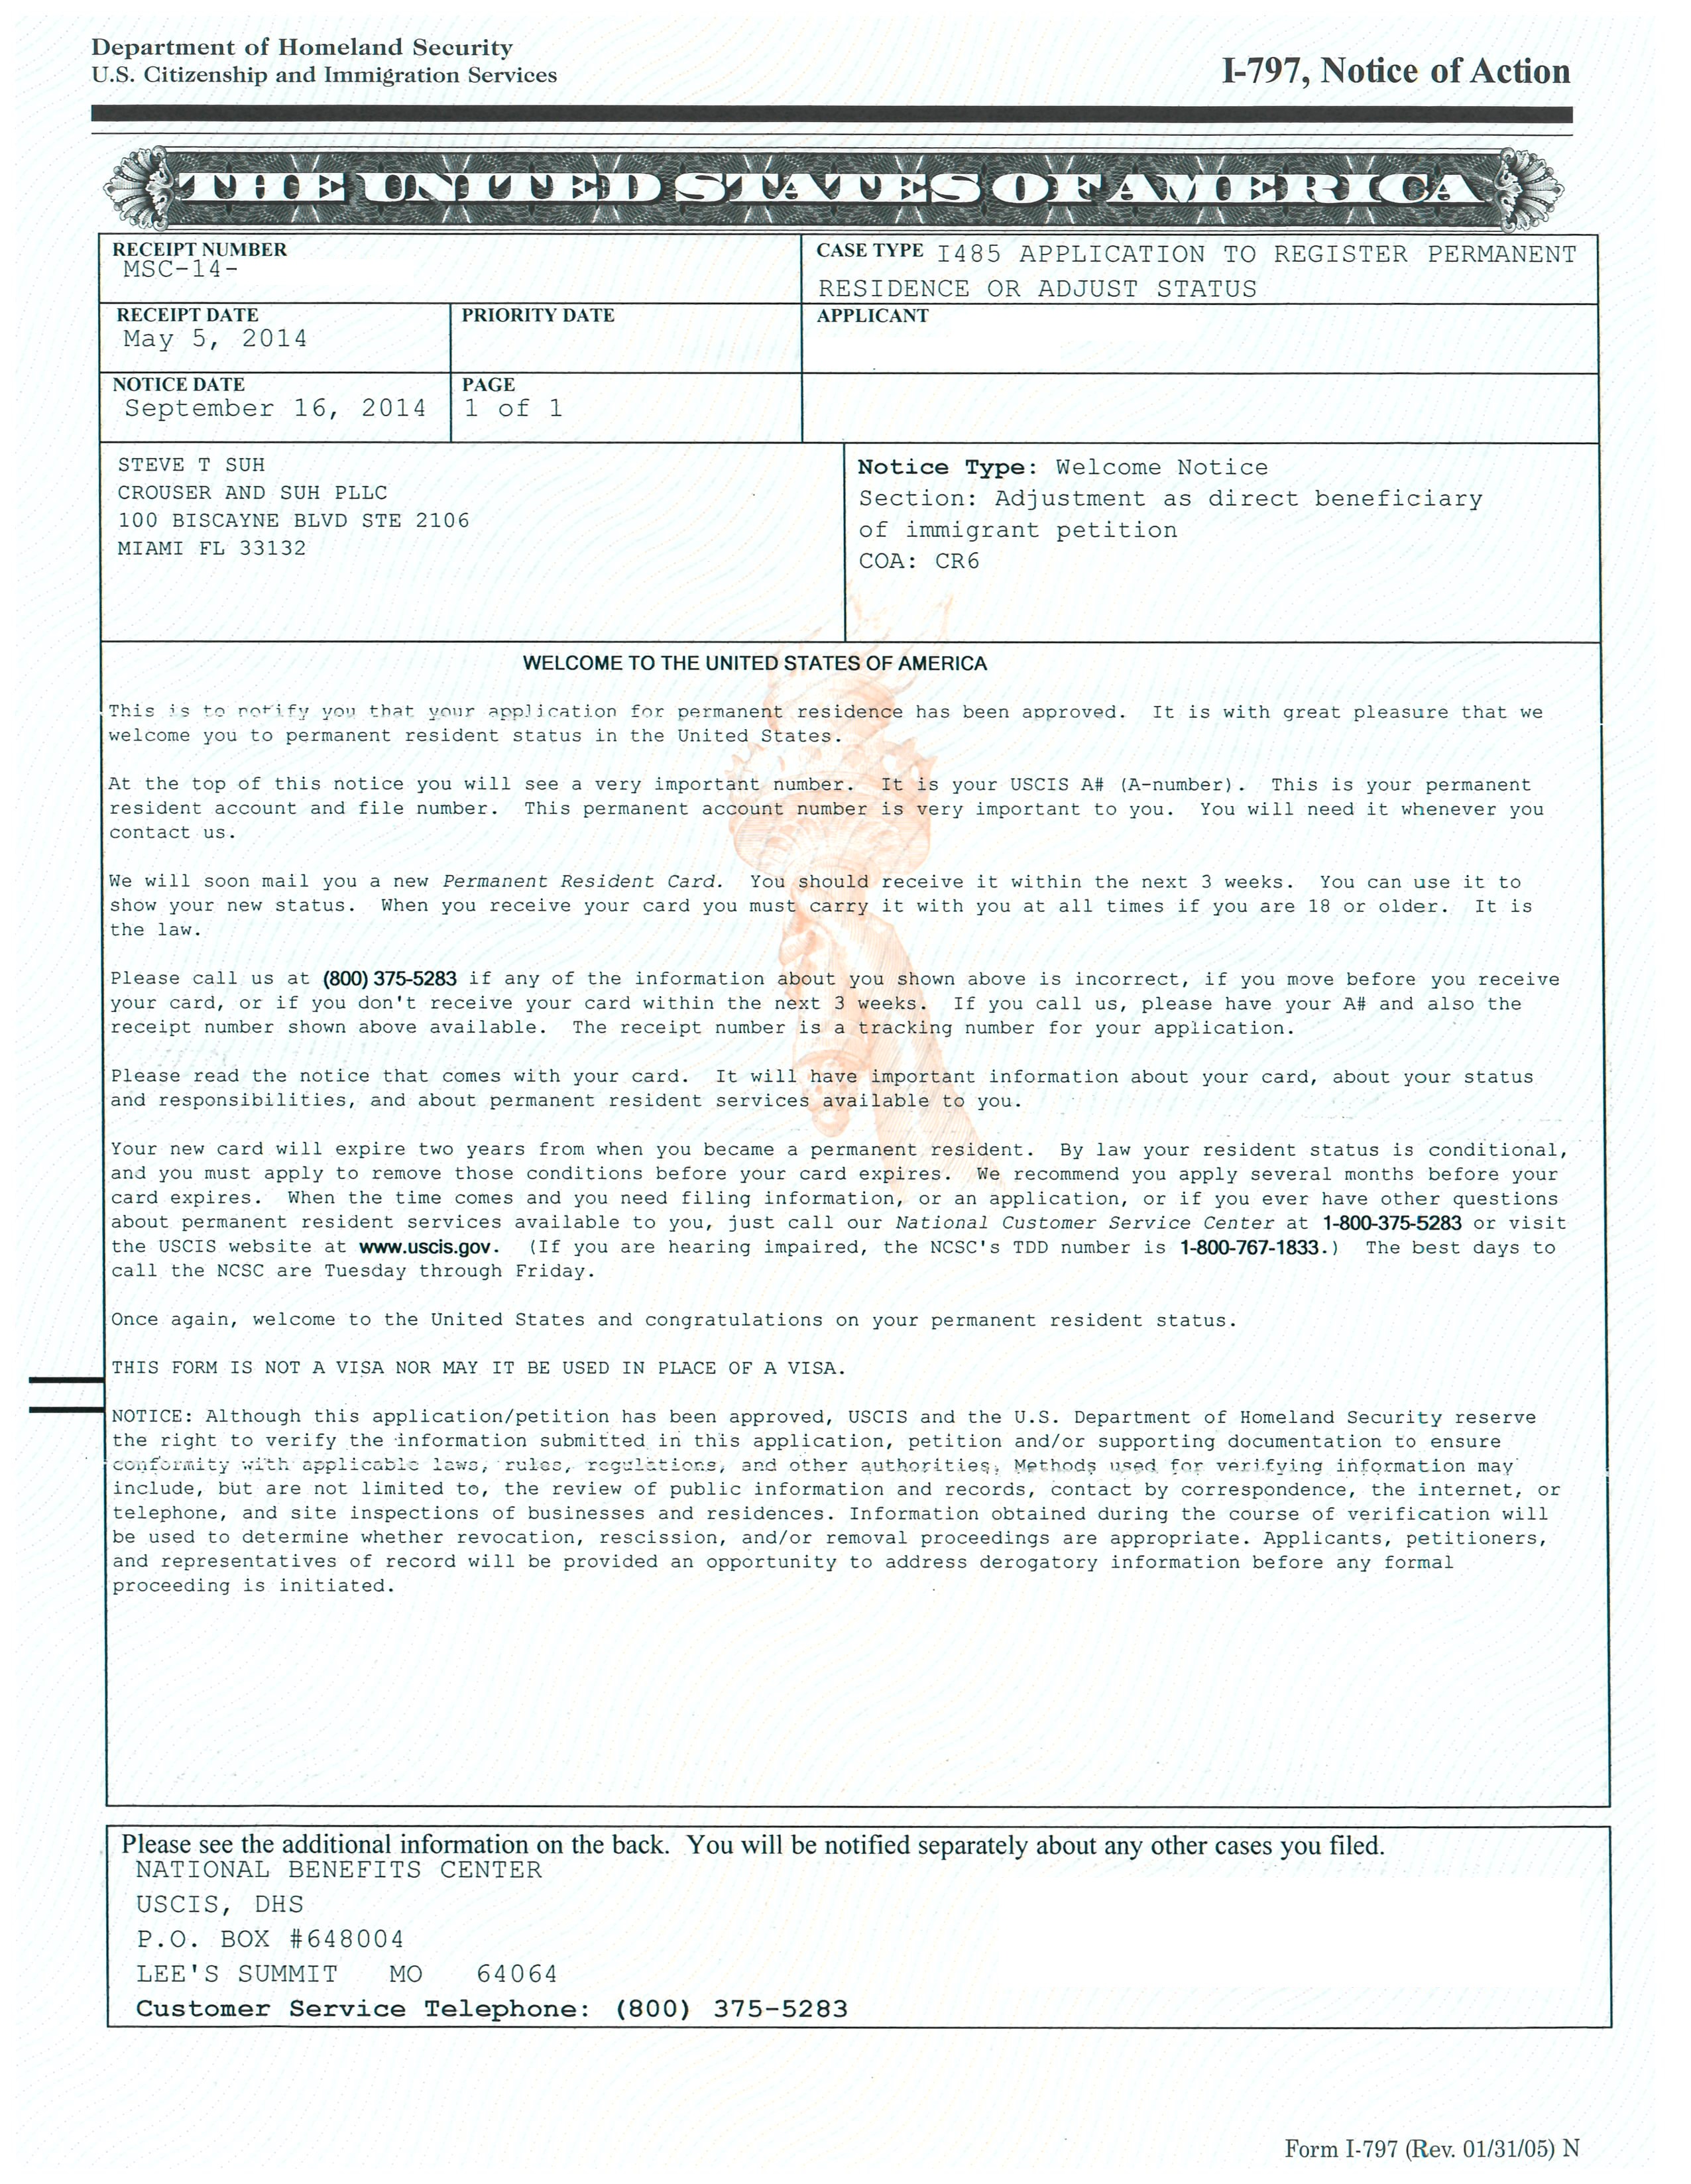 marriagepetitionapprovalnotice09222014.jpg